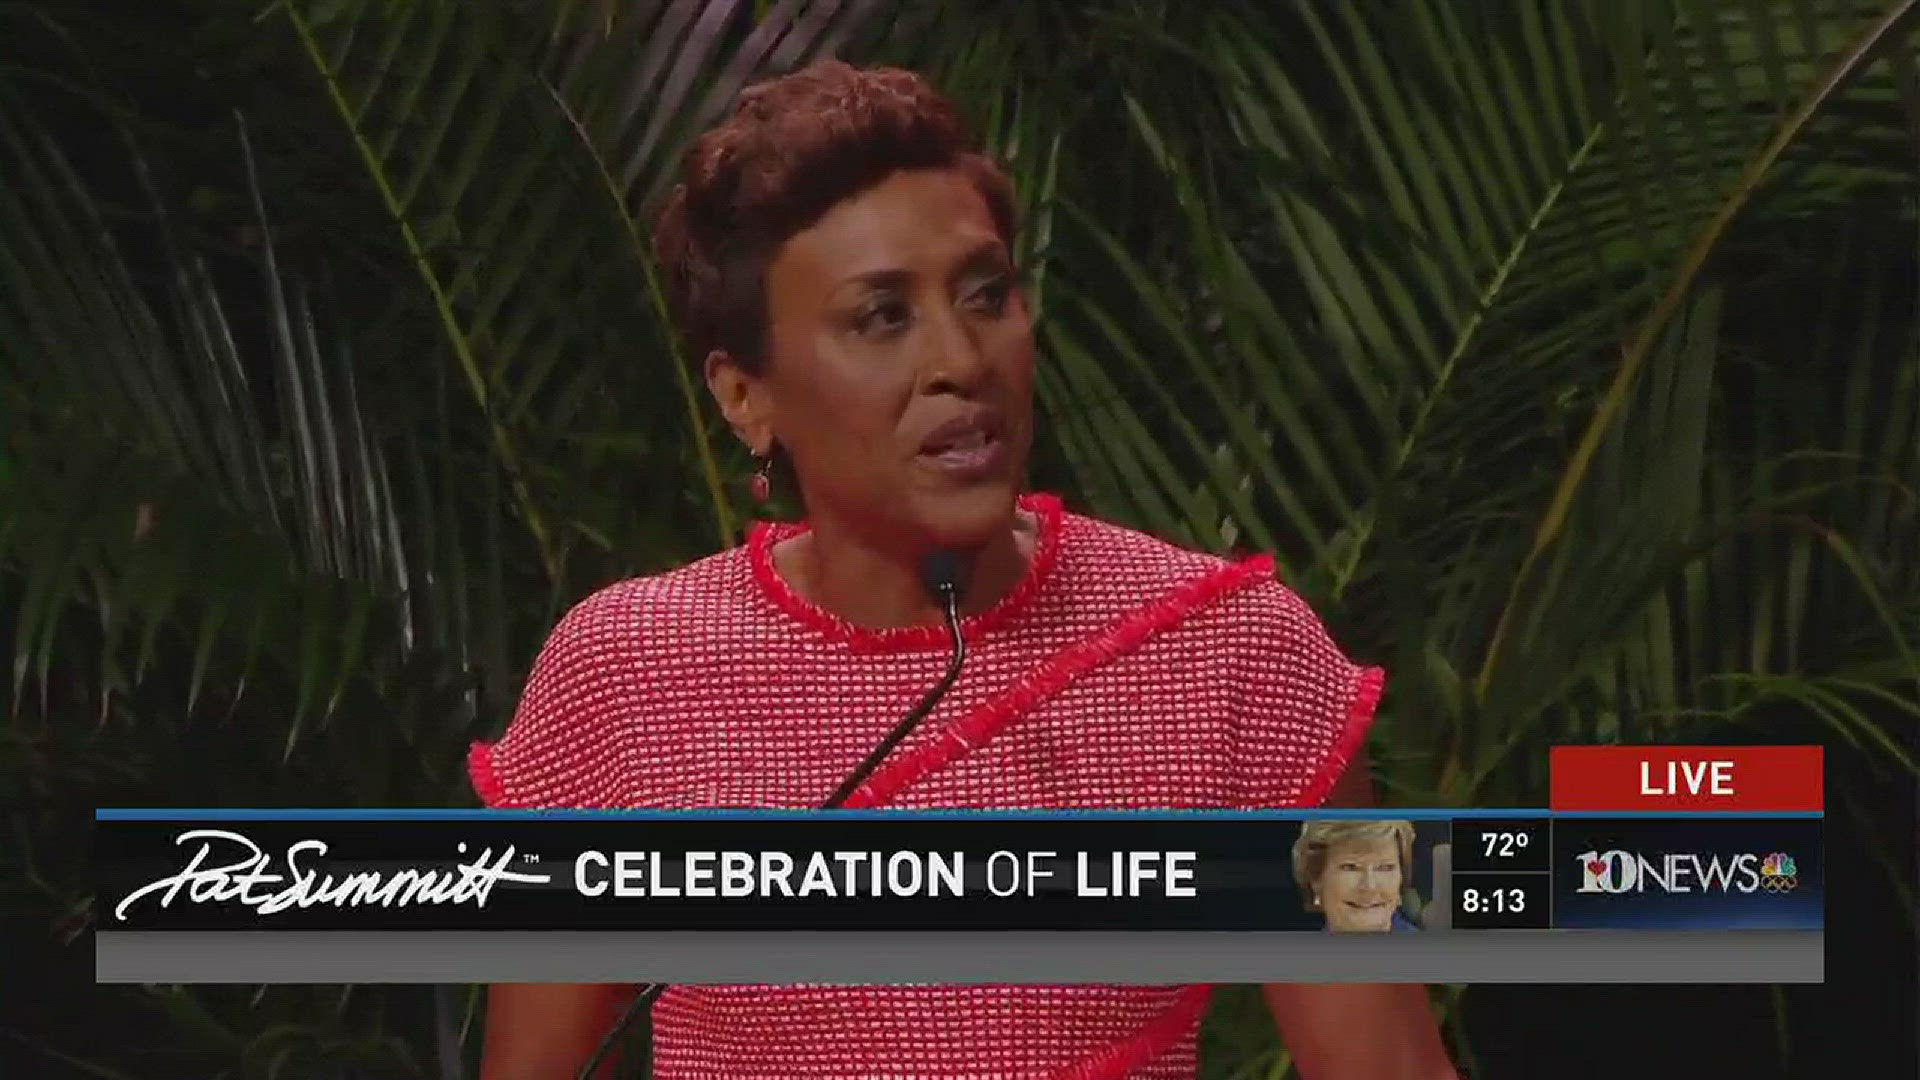 Broadcaster Robin Roberts helps conclude the Pat Summitt Celebration of Life ceremony